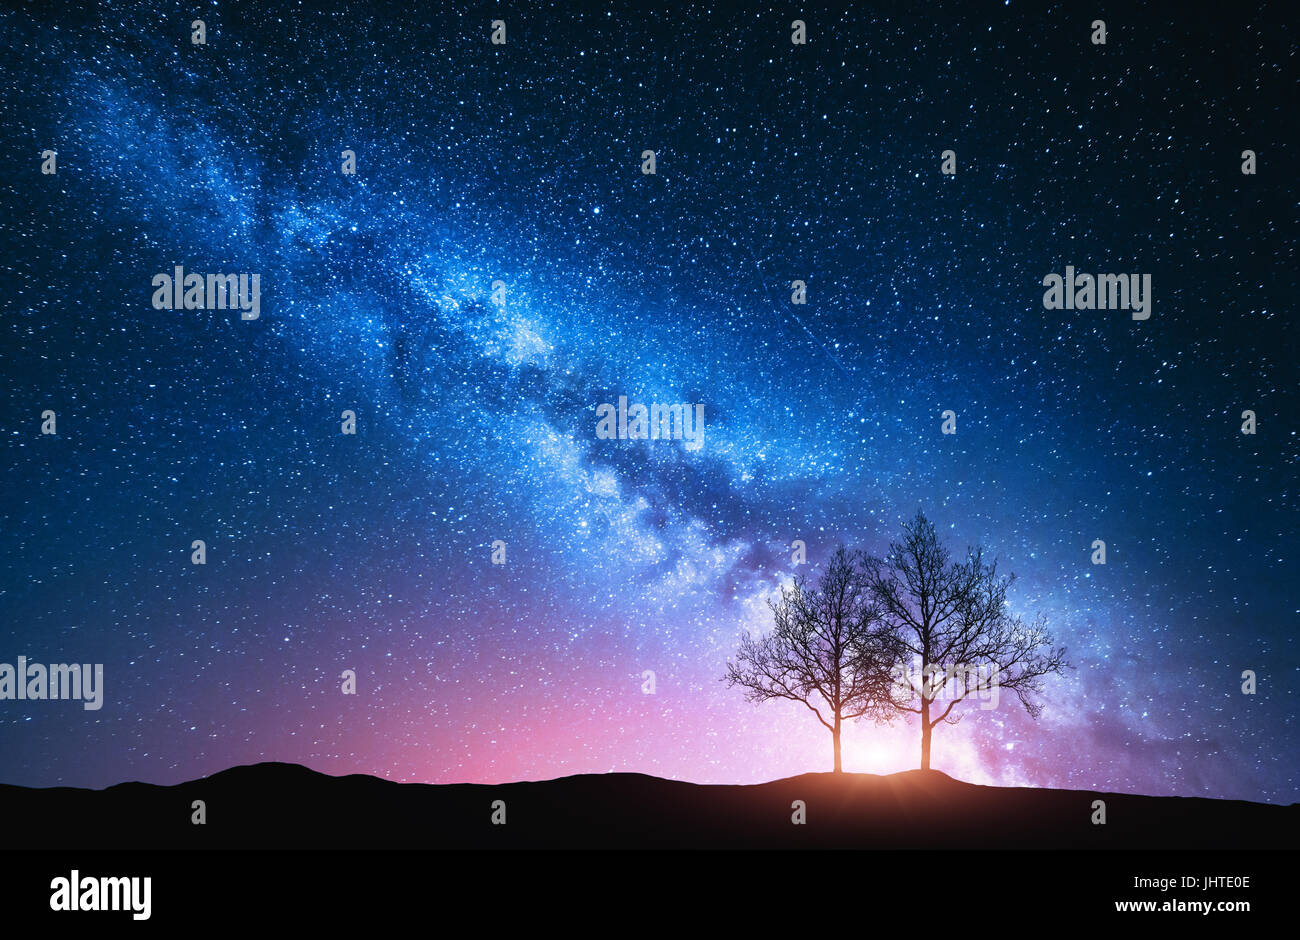 Starry sky with pink Milky Way and trees. Night landscape with alone trees on the hill against colorful milky way. Amazing galaxy. Nature background w Stock Photo